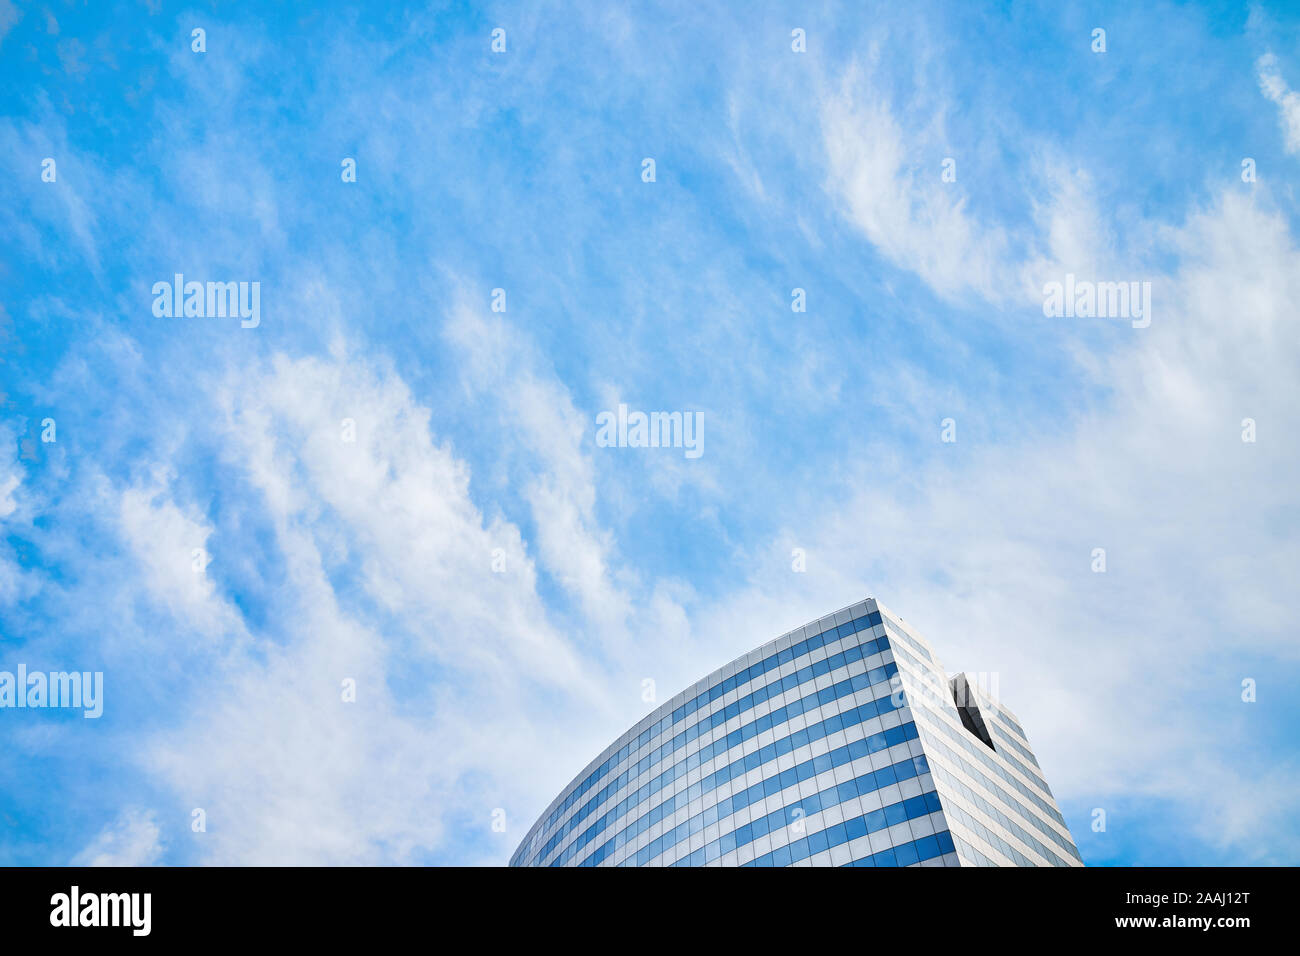 The top of a modern skyscraper or commercial building with glass windows and blue sky with clouds in the background Stock Photo